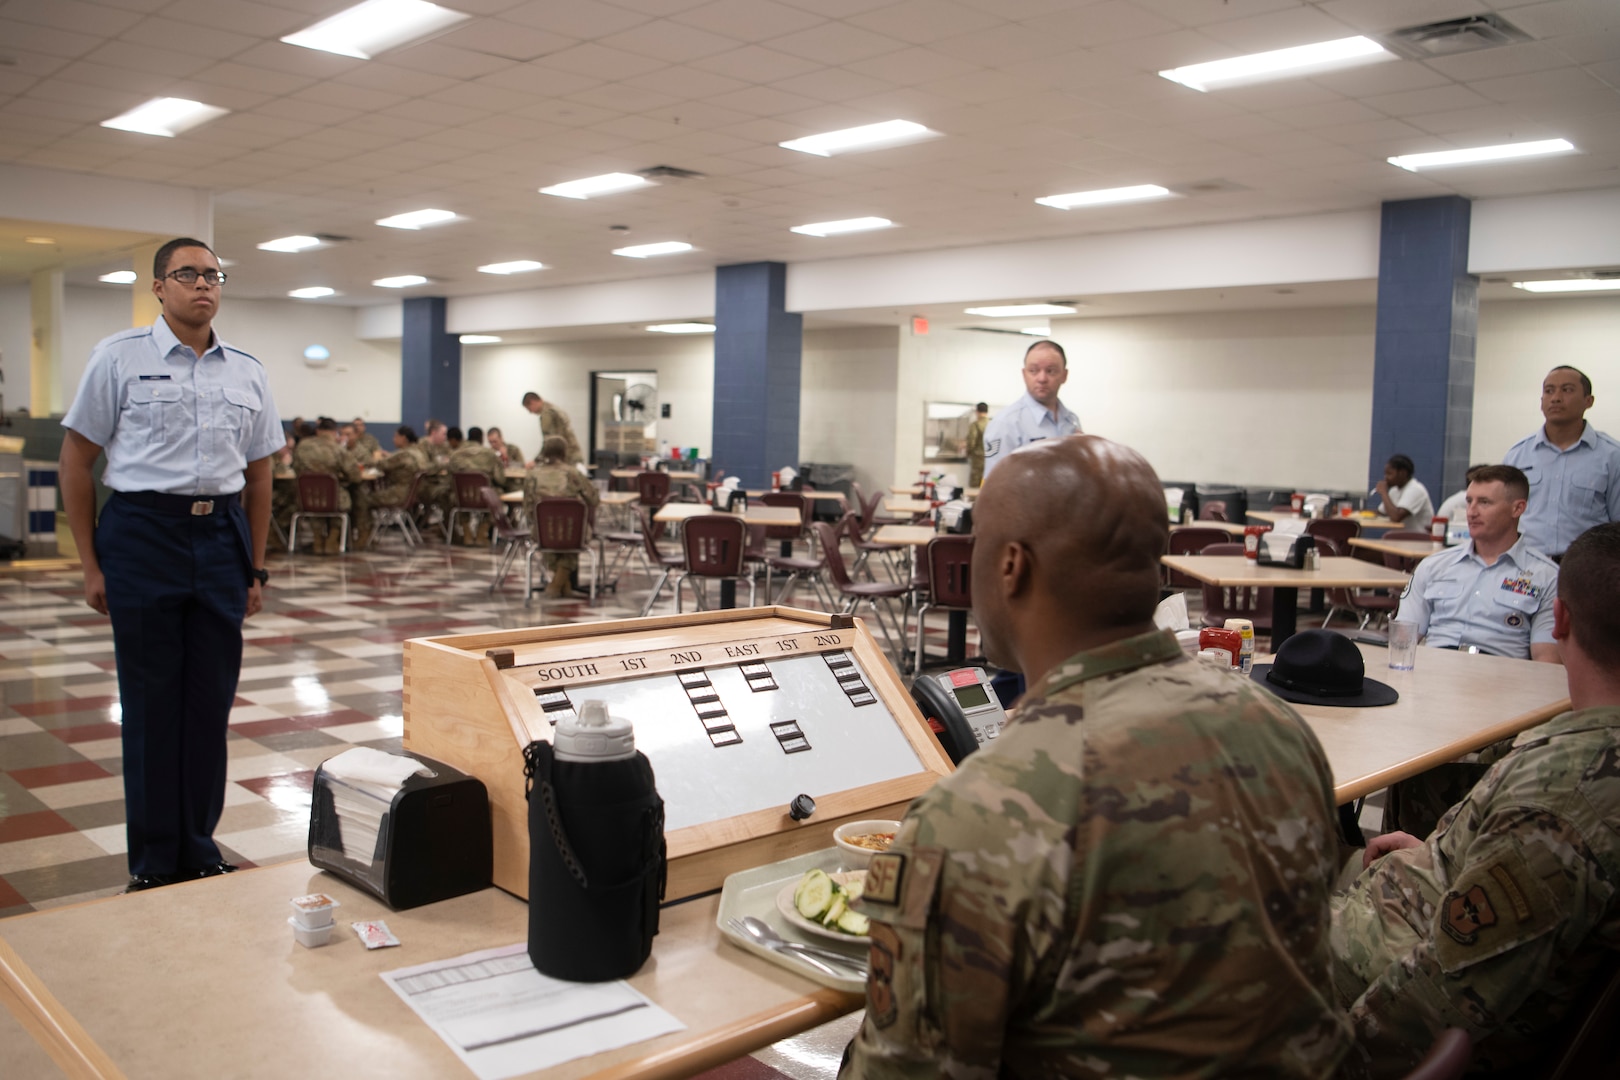 Flights must request permission from the "Snake Pit" so there is control of how many flights enter and exit the dining facility ensuring the area does not become overwhelmed with too many people at one time.